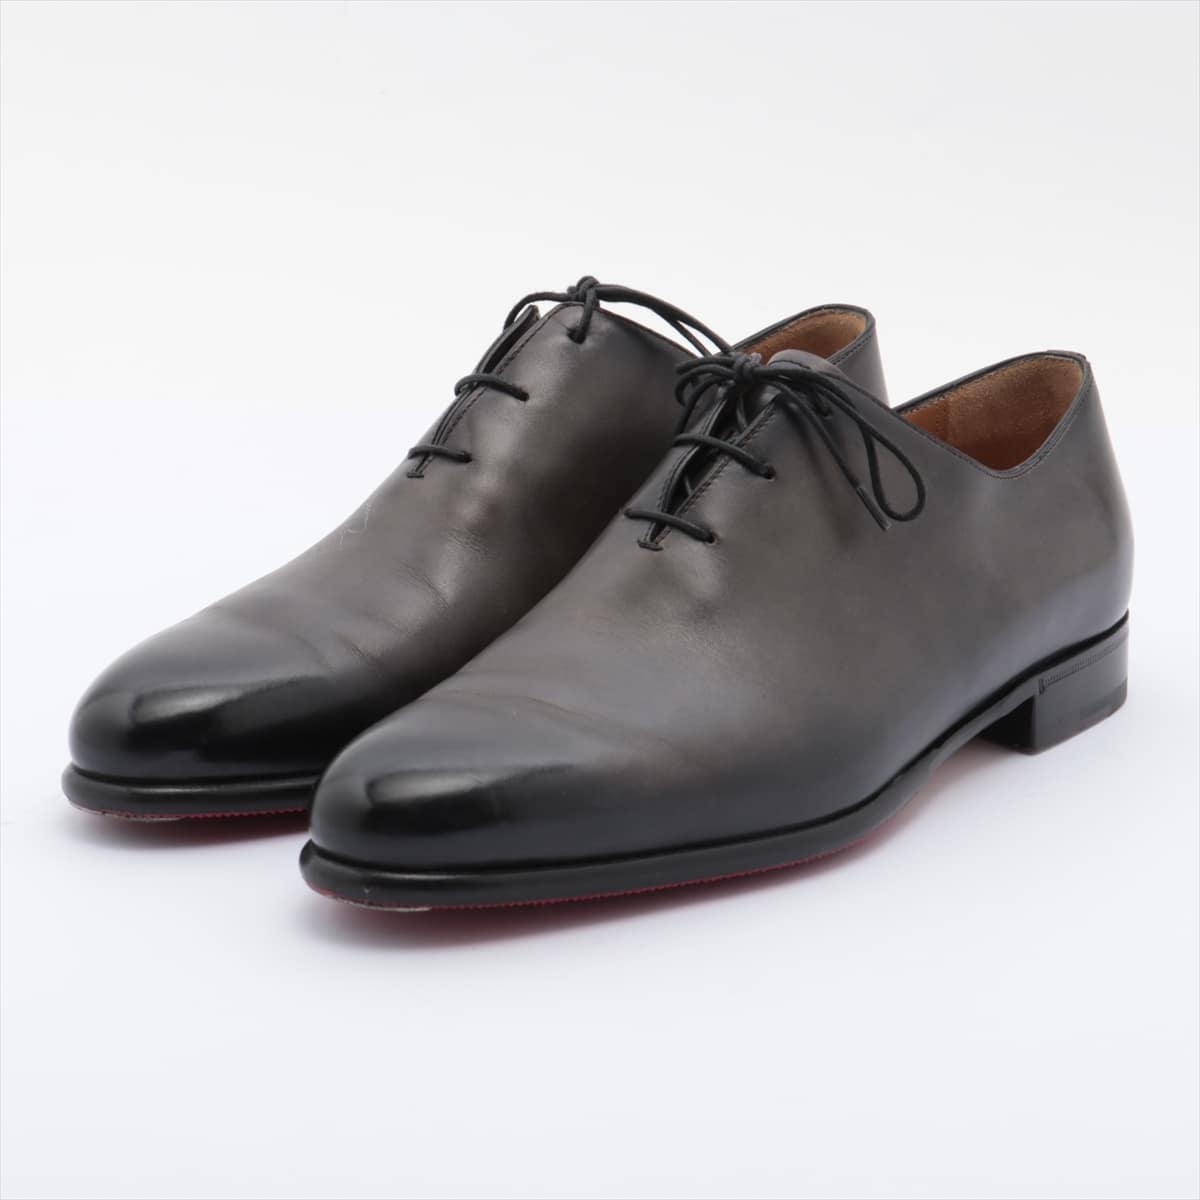 Berluti Calligraphy Leather Shoes 5 1/2 Men's Black With genuine shoe tree